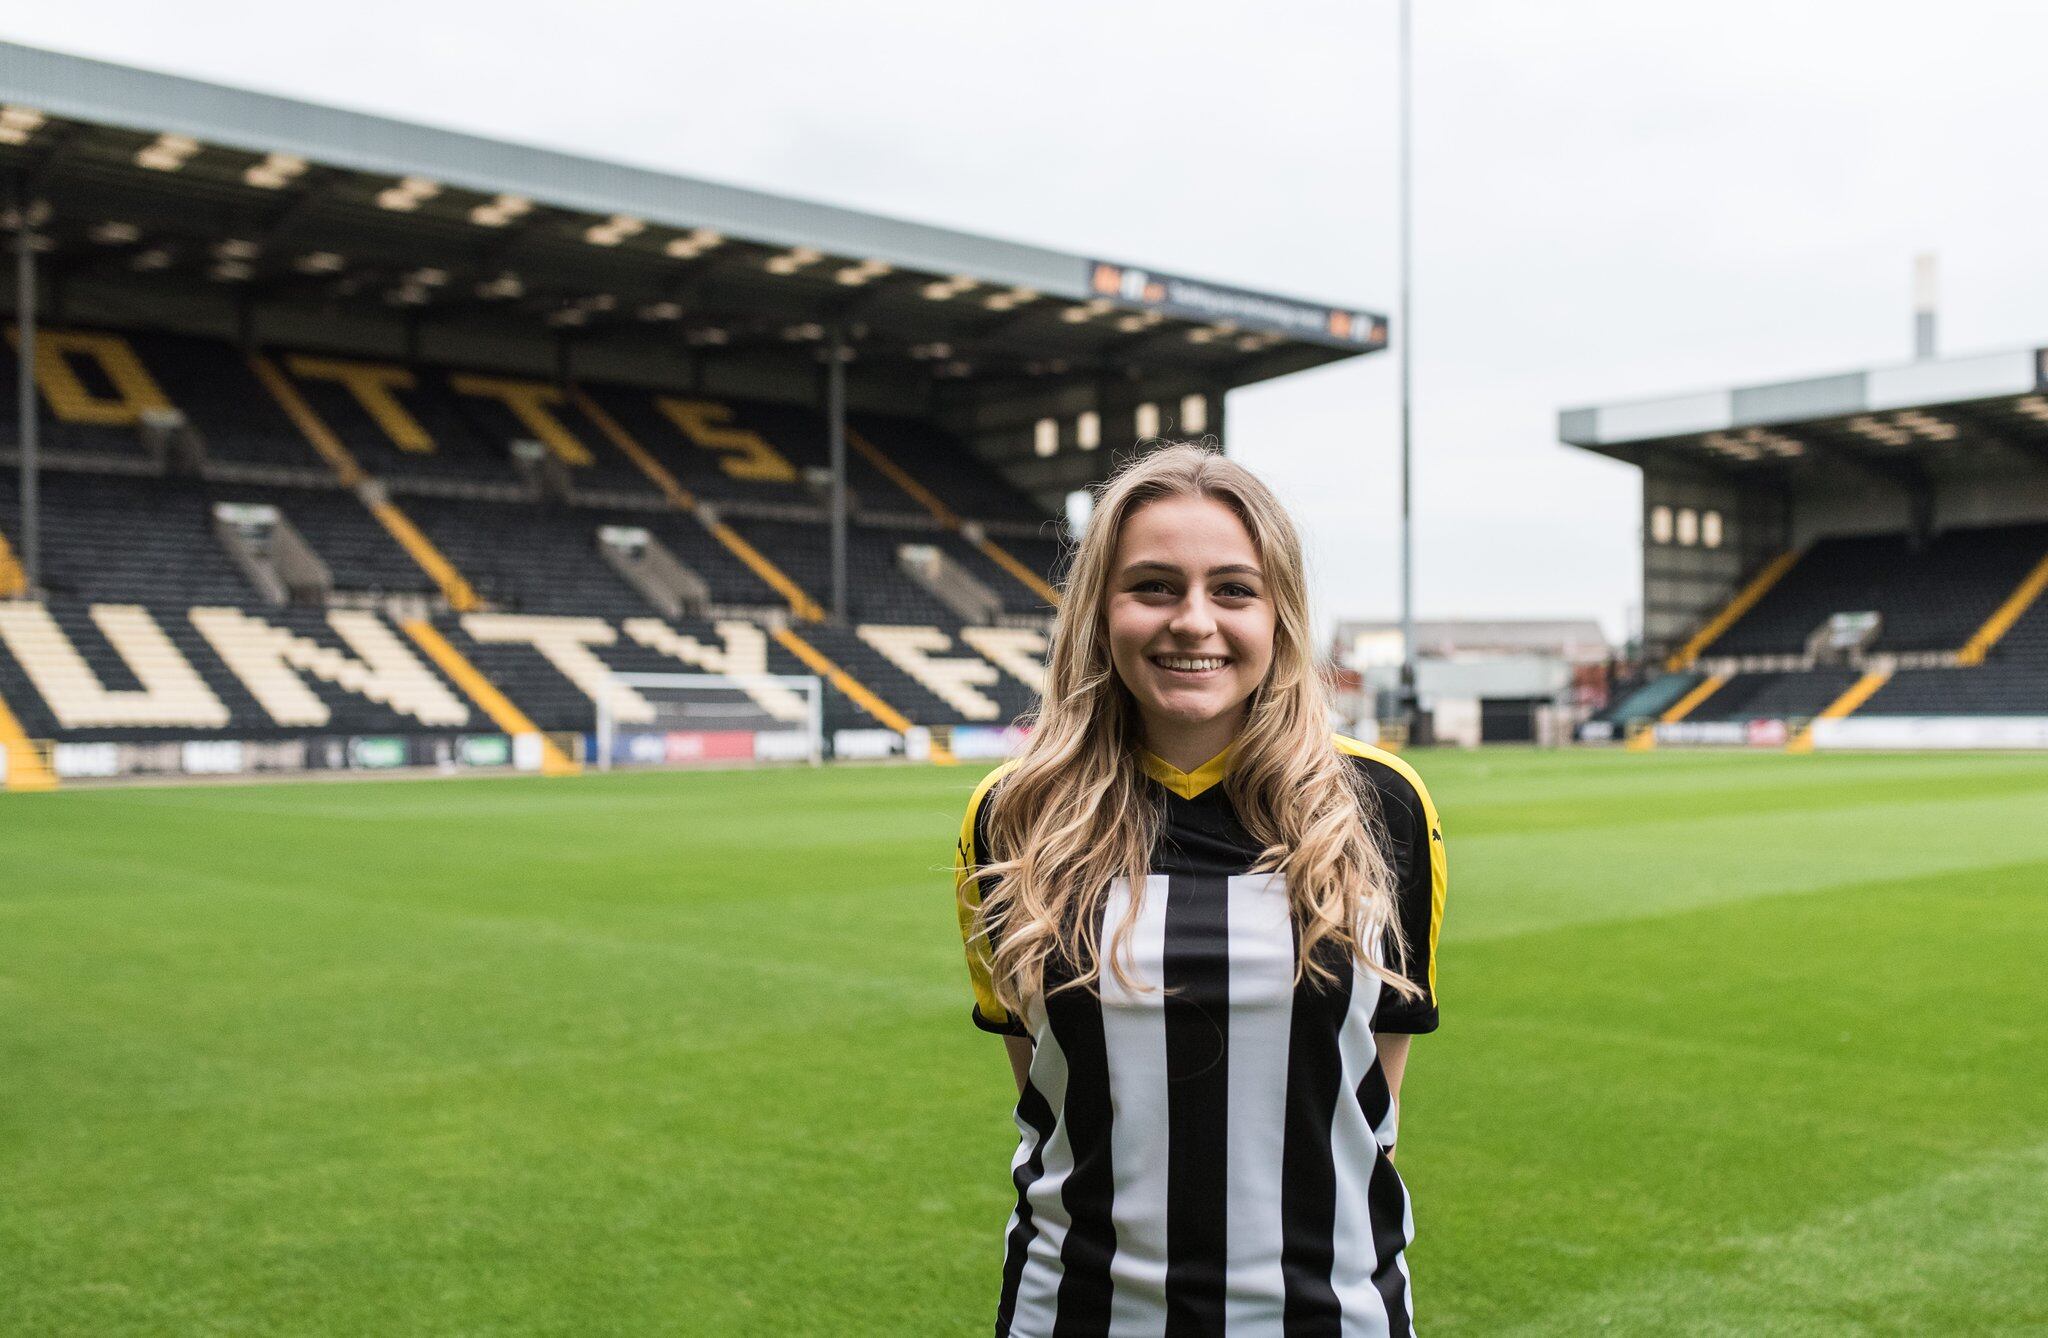 notts-county-ladies-fc-25-football-club-facts